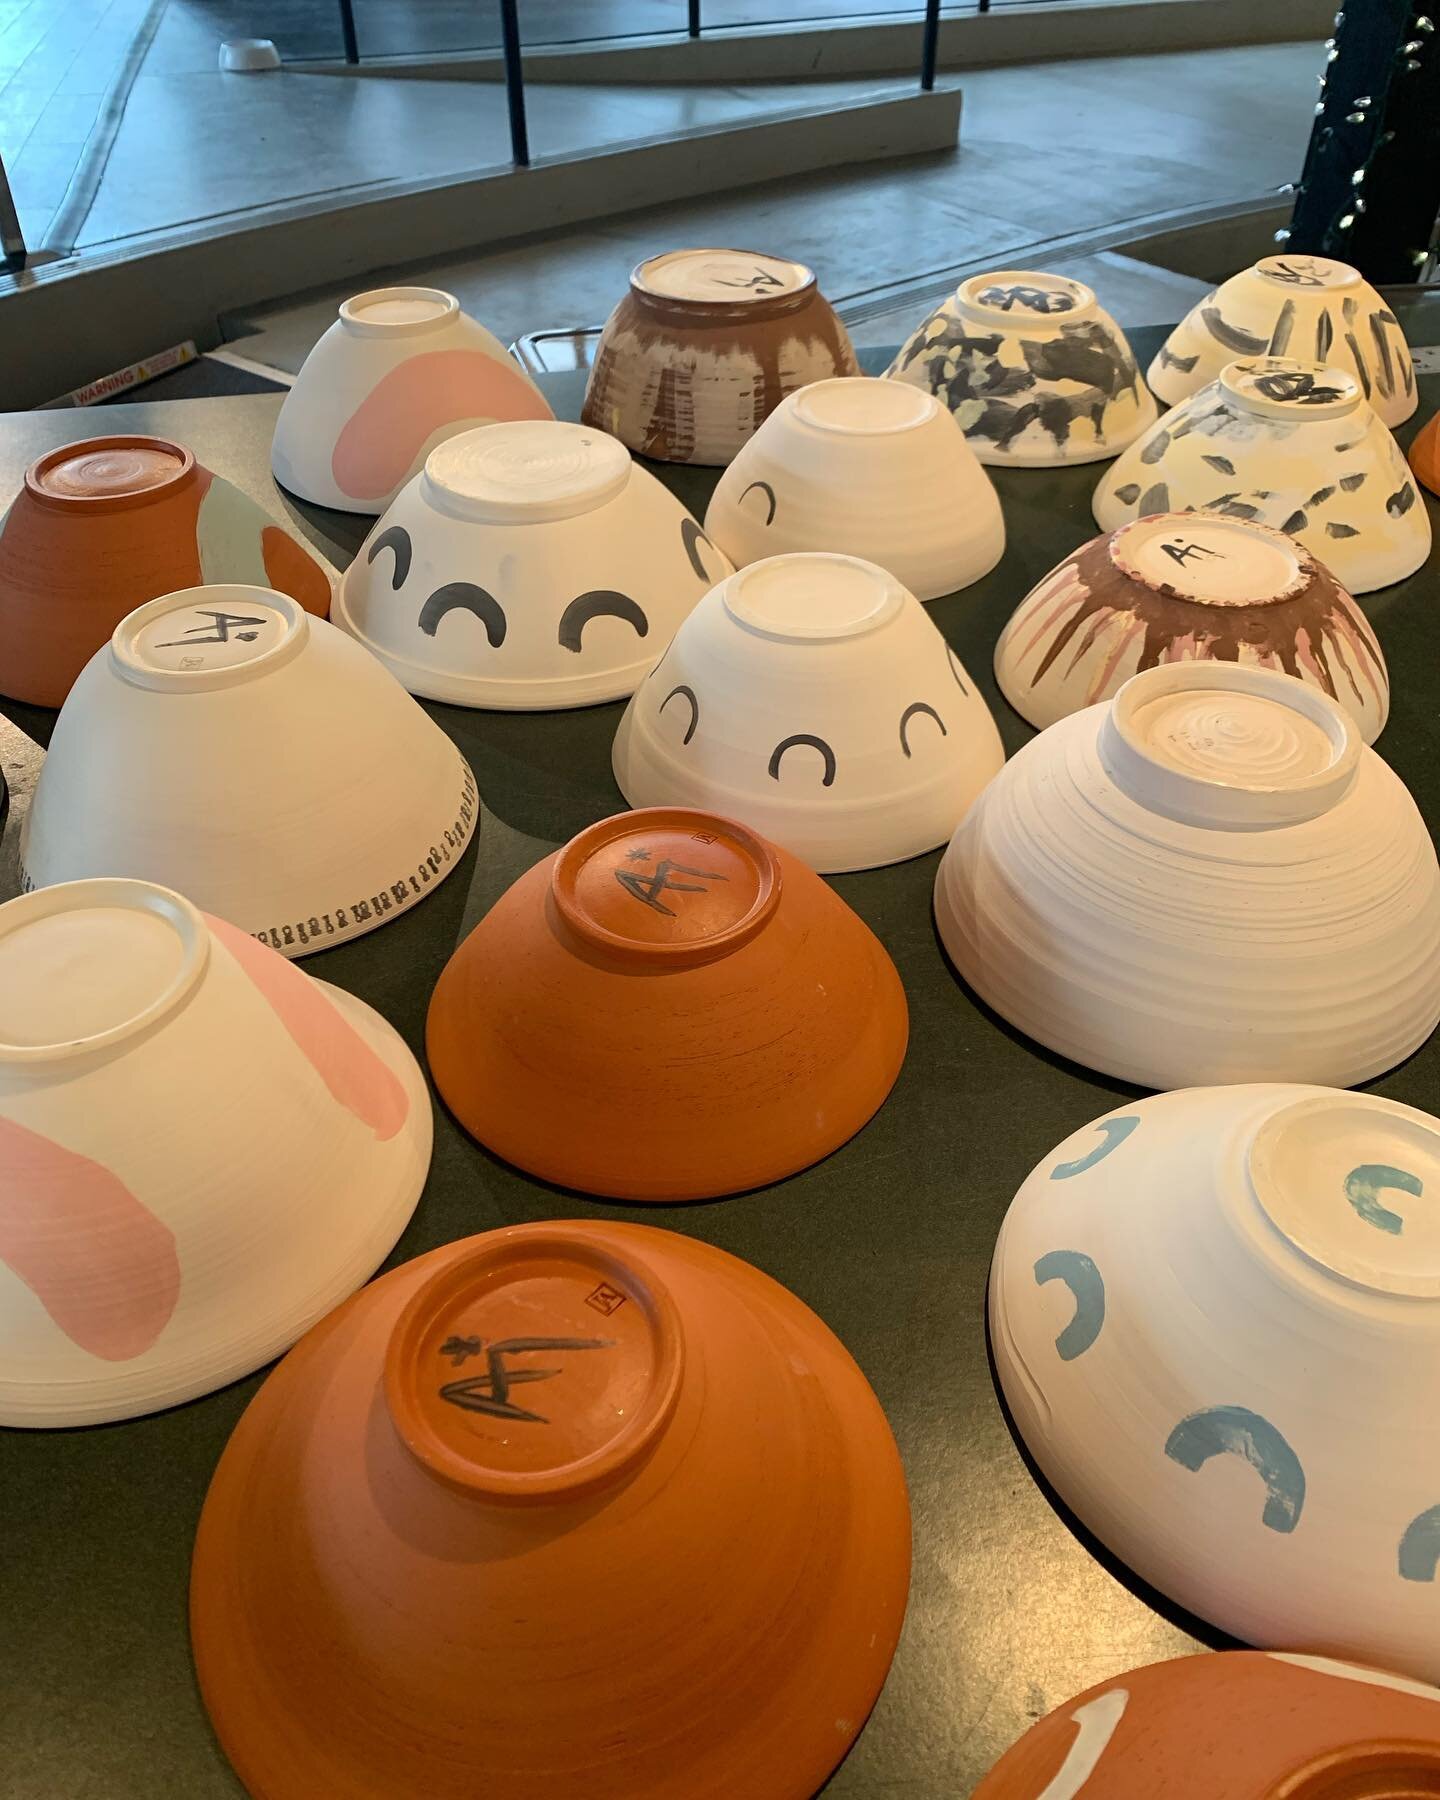 At @gathermakeshelter I get to collaborate with 100&rsquo;s of artists! These bowls have been donated by generous  ceramic artists, painted by our GMS artists, and will be glazed by me.  #pnwartist #artistsoninstagram #houselessartist #ceramics #glaz